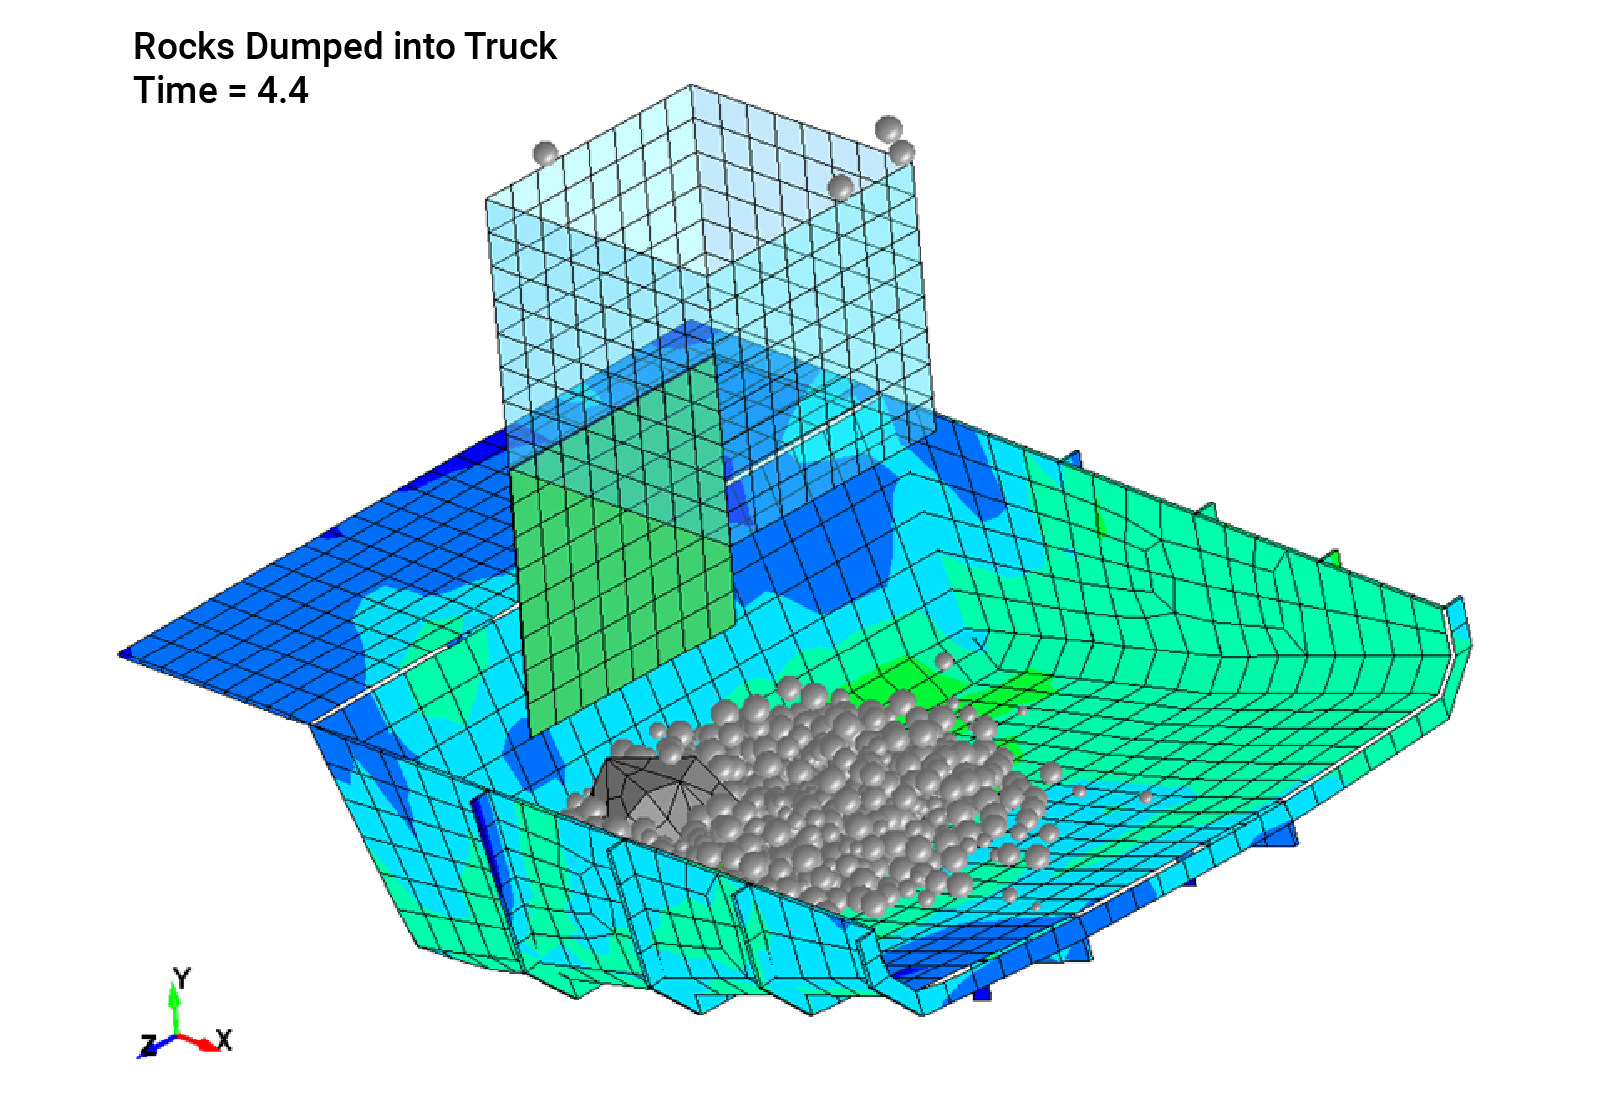 Figure 2:  Transient stress analysis results from rocks hitting dump truck bed.